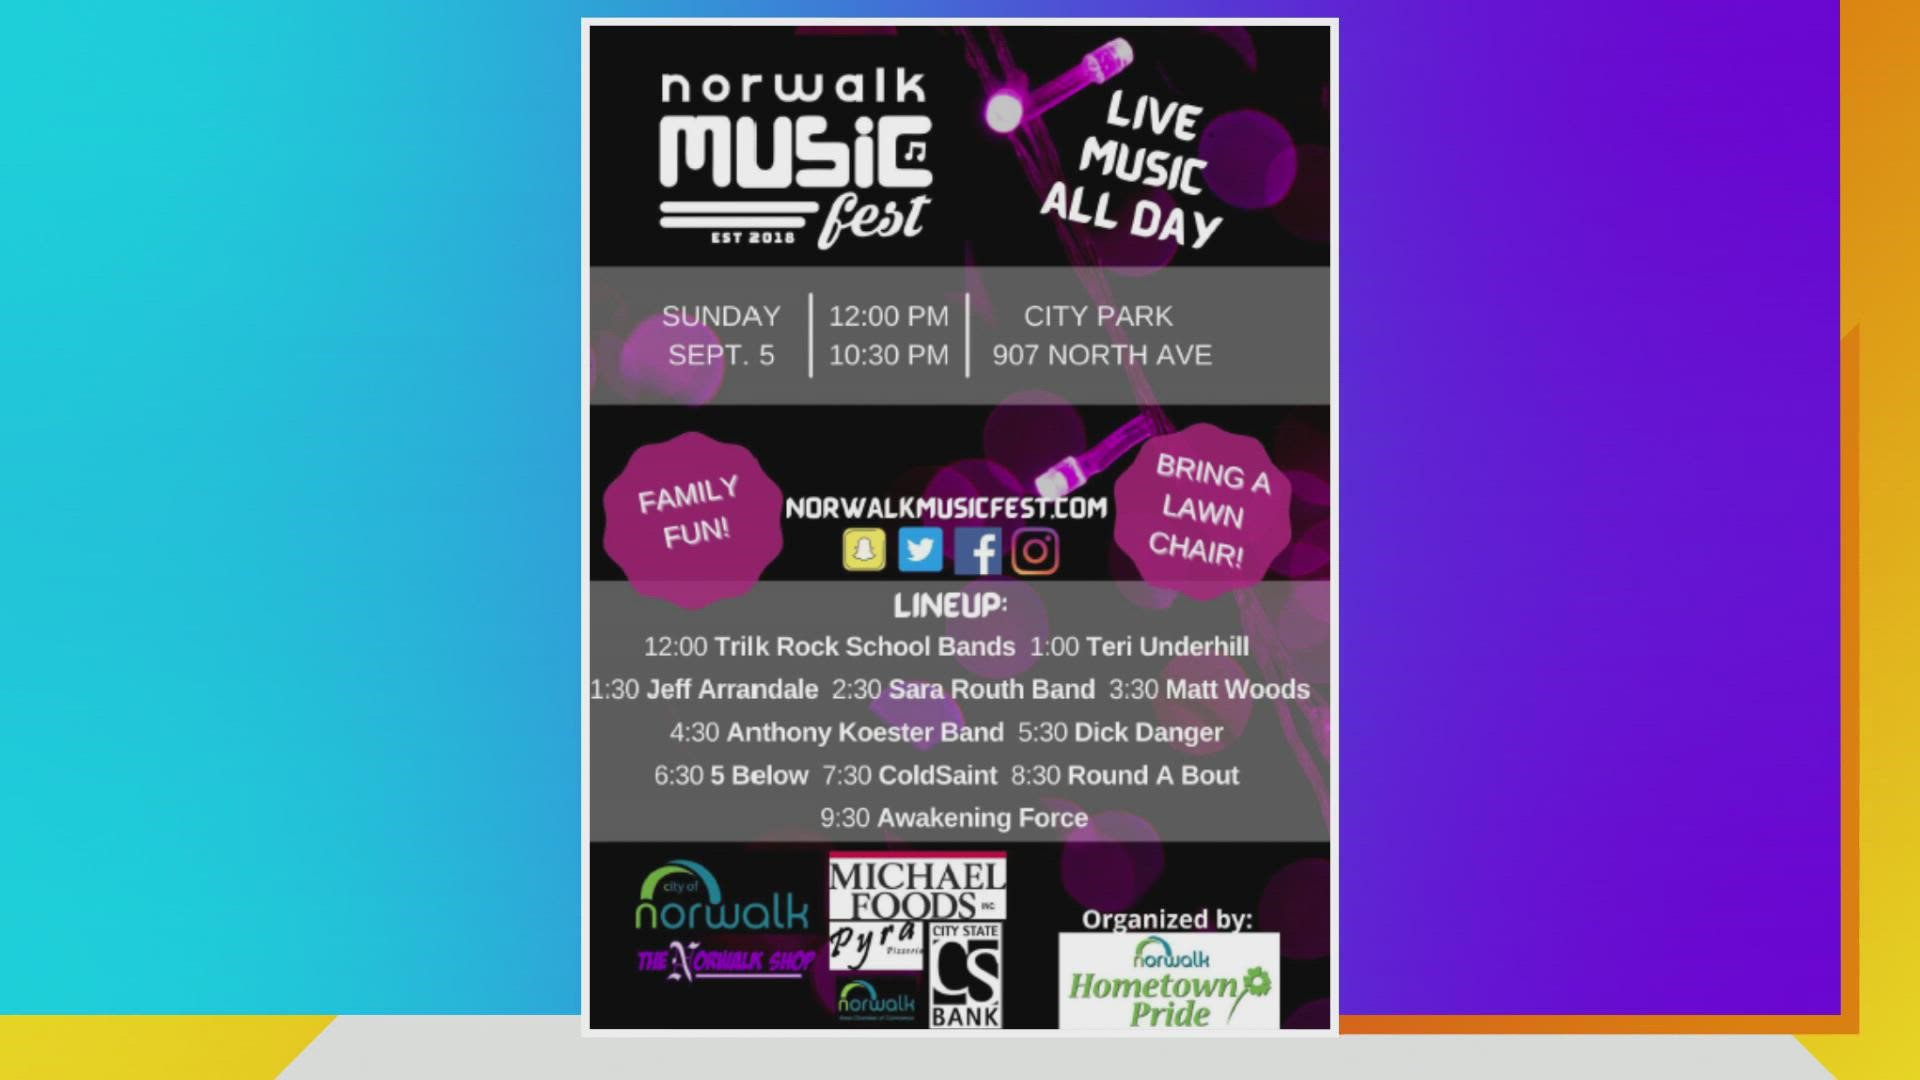 Norwalk Music Fest is happening THIS SUNDAY September 5, 2021 at the City Park. The event is FREE to attend and will include 11 bands performing from Noon-10:30pm!